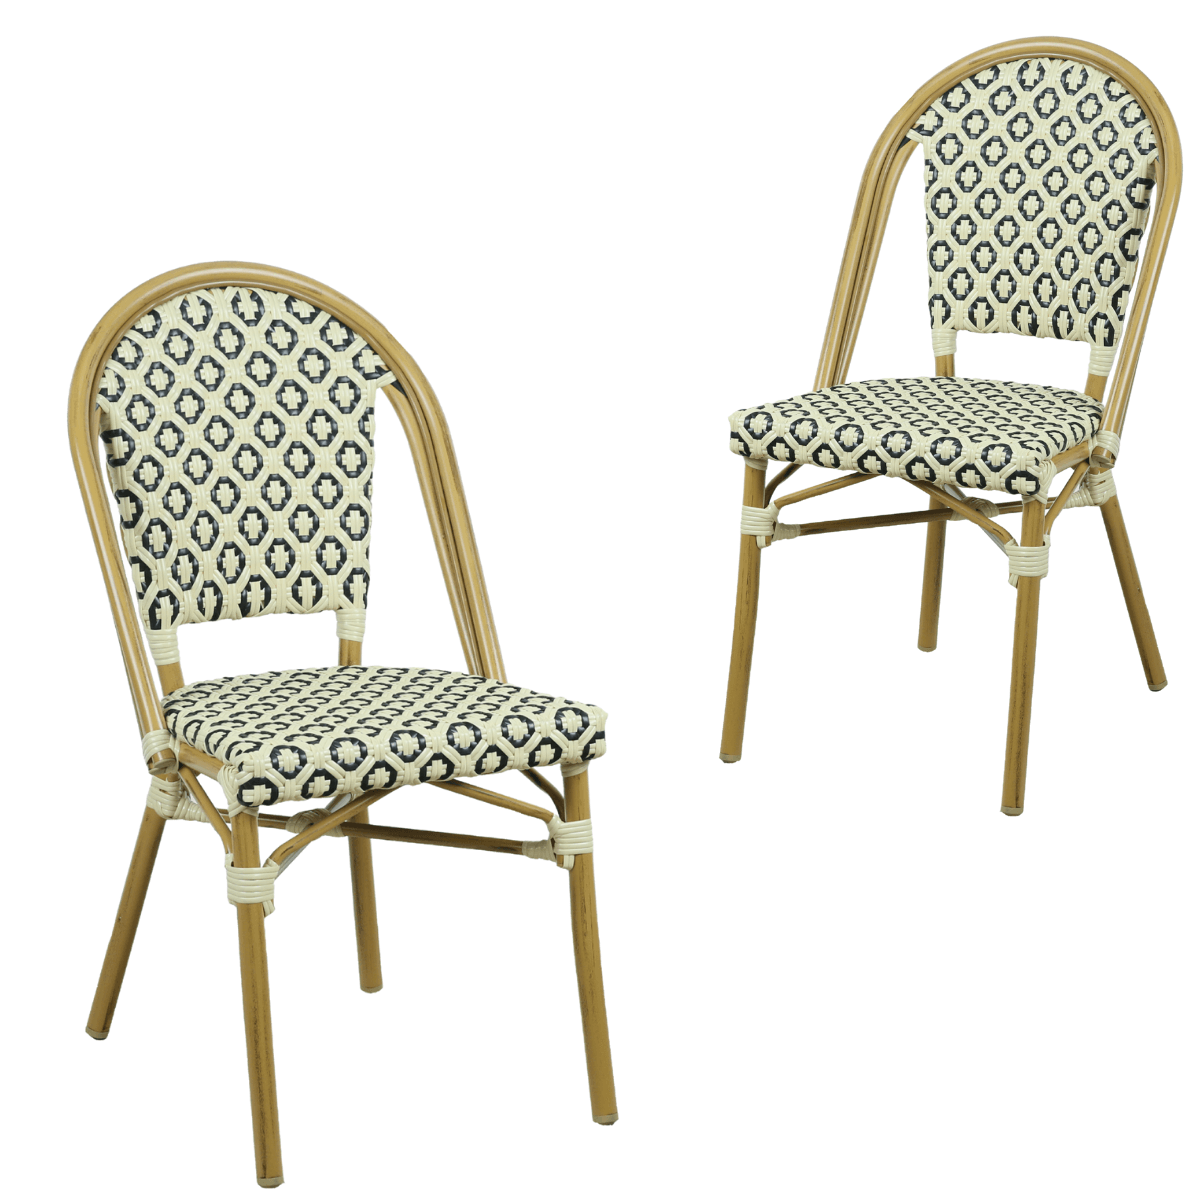 Lana Brown Outdoor Dining Chair Set